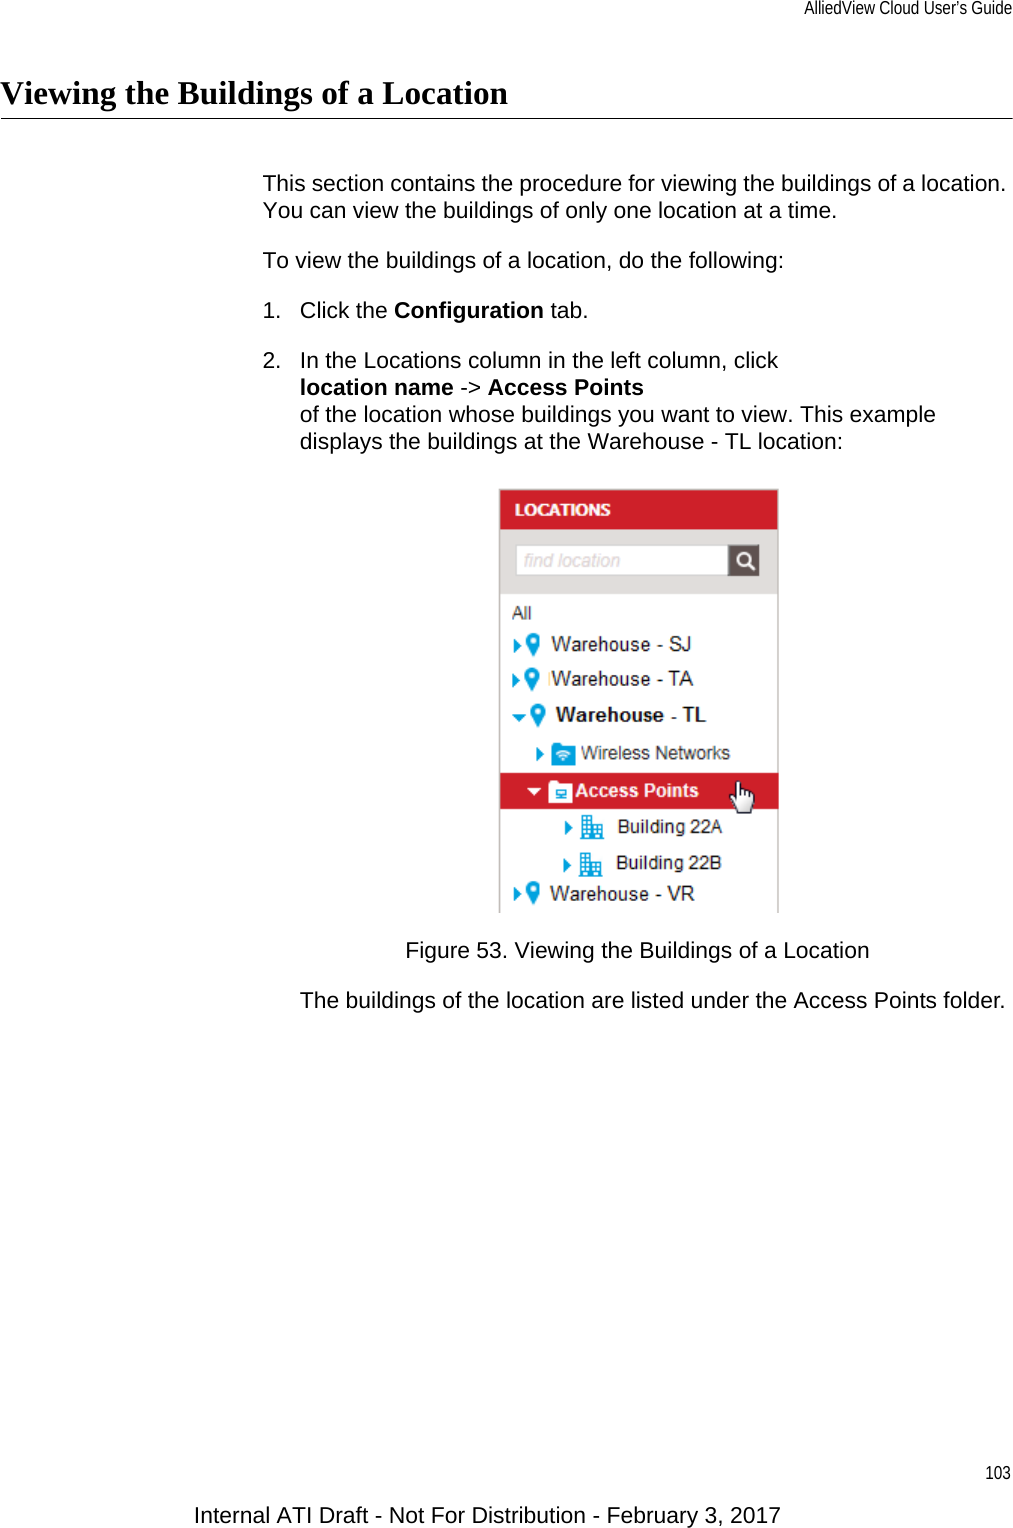 AlliedView Cloud User’s Guide103Viewing the Buildings of a LocationThis section contains the procedure for viewing the buildings of a location. You can view the buildings of only one location at a time.To view the buildings of a location, do the following:1. Click the Configuration tab.2. In the Locations column in the left column, clicklocation name -&gt; Access Pointsof the location whose buildings you want to view. This example displays the buildings at the Warehouse - TL location:Figure 53. Viewing the Buildings of a LocationThe buildings of the location are listed under the Access Points folder.Internal ATI Draft - Not For Distribution - February 3, 2017